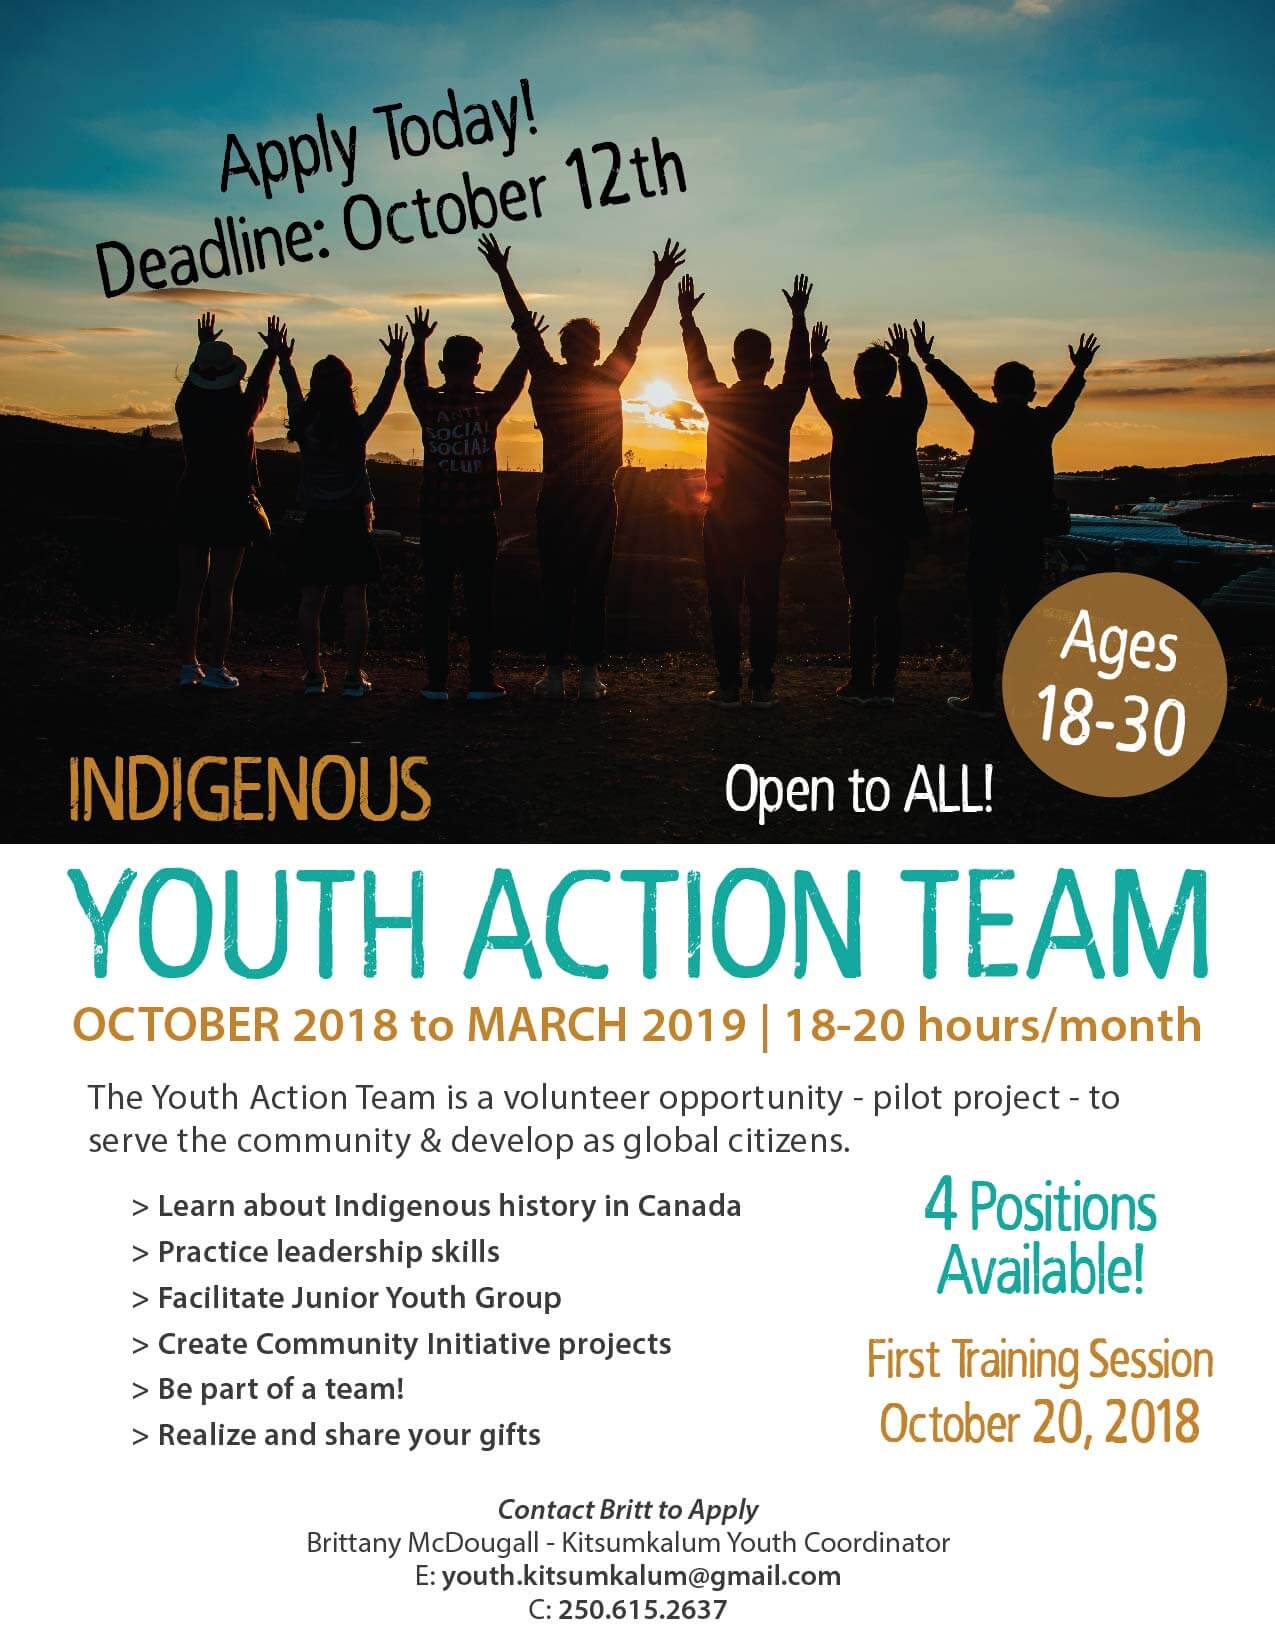 Youth Action Team – Apply Today!